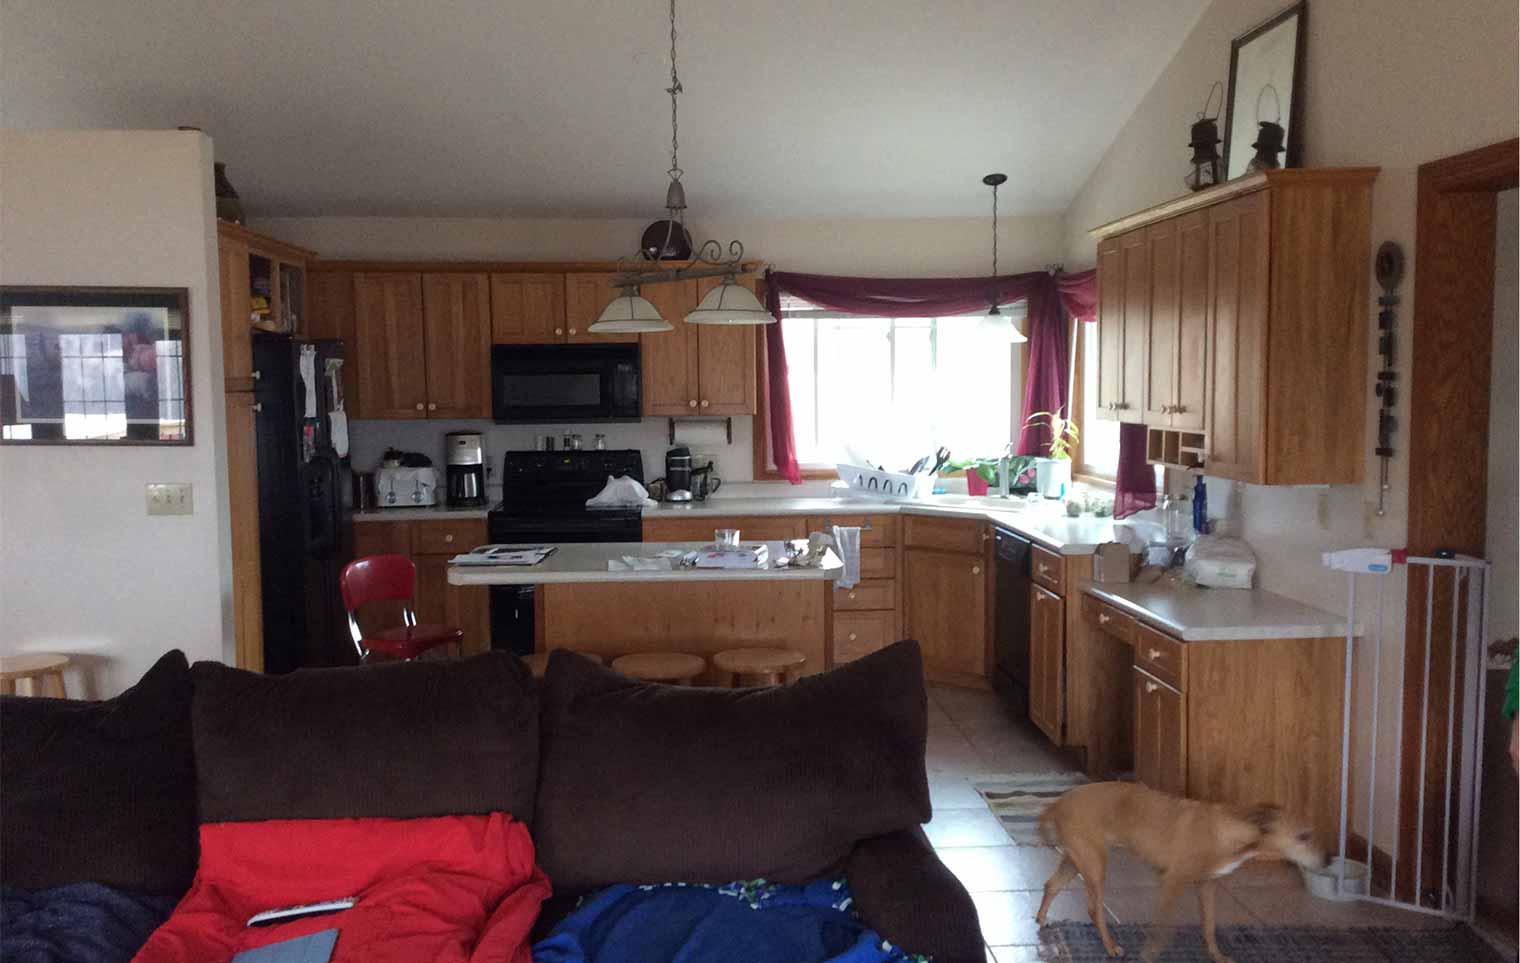 Before photo of kitchen to be remodeled by Silent Rivers of Des Moines shows hickory cabinets in good shape but layout needs better flow